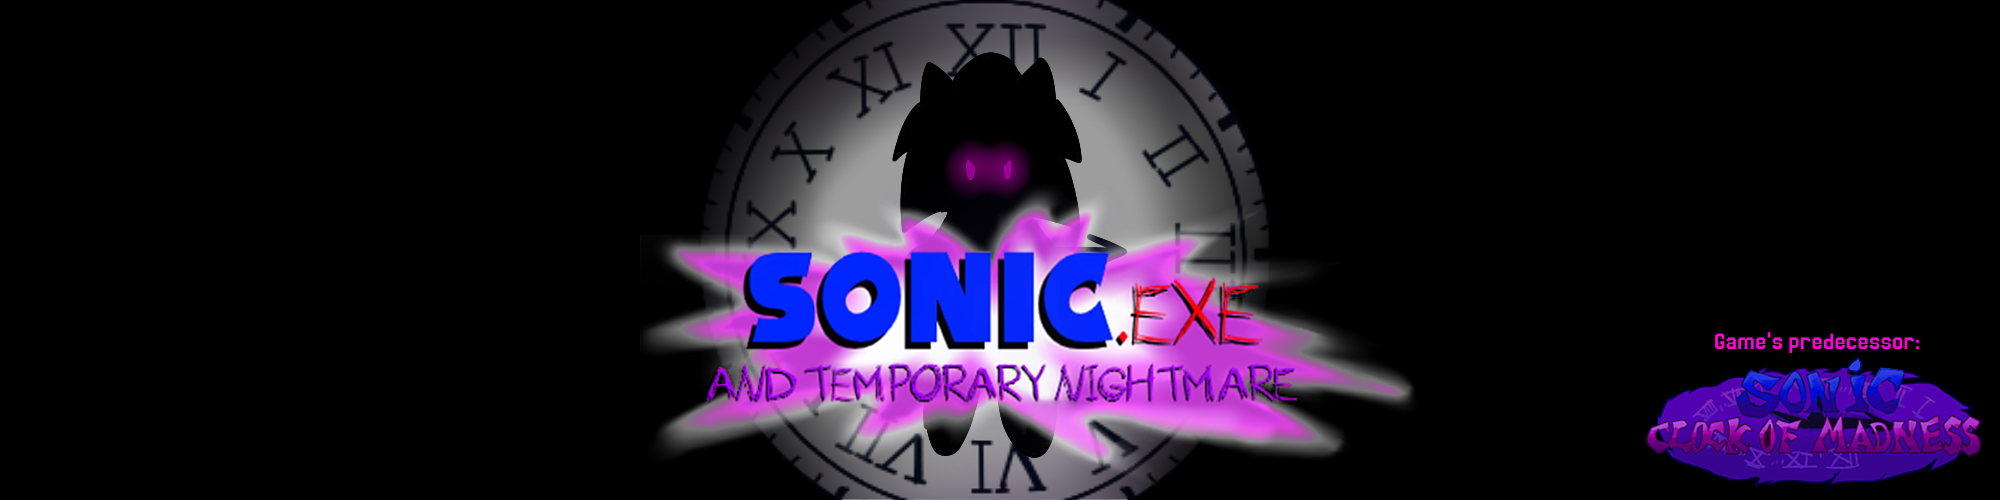 Sonic.exe and Temporary Nightmare (Archive)